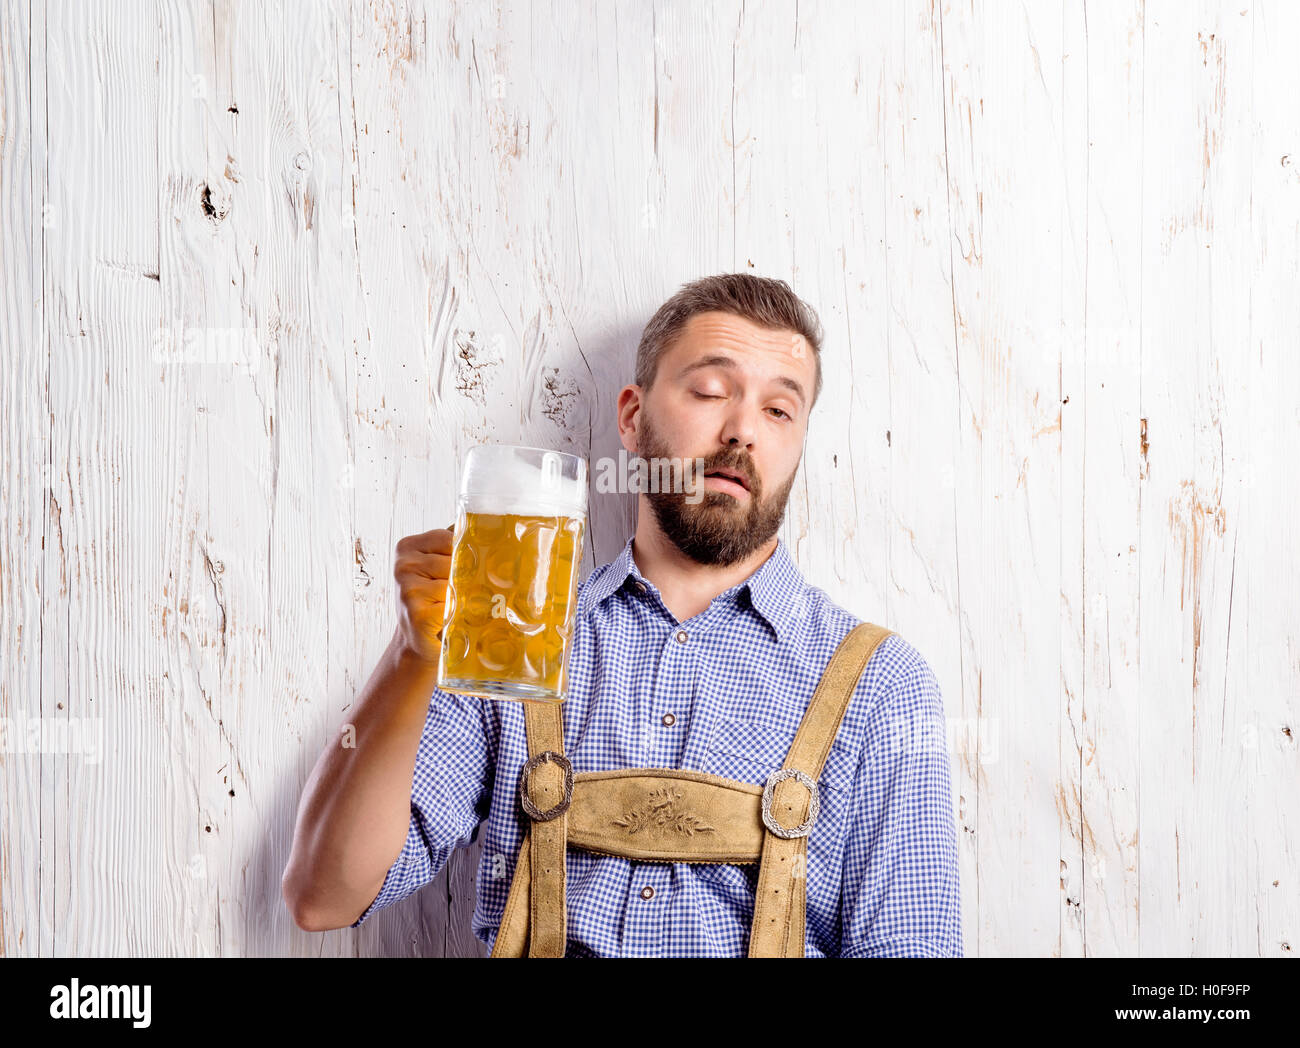 Drunk man in traditional bavarian clothes holding beer mugs Stock Photo